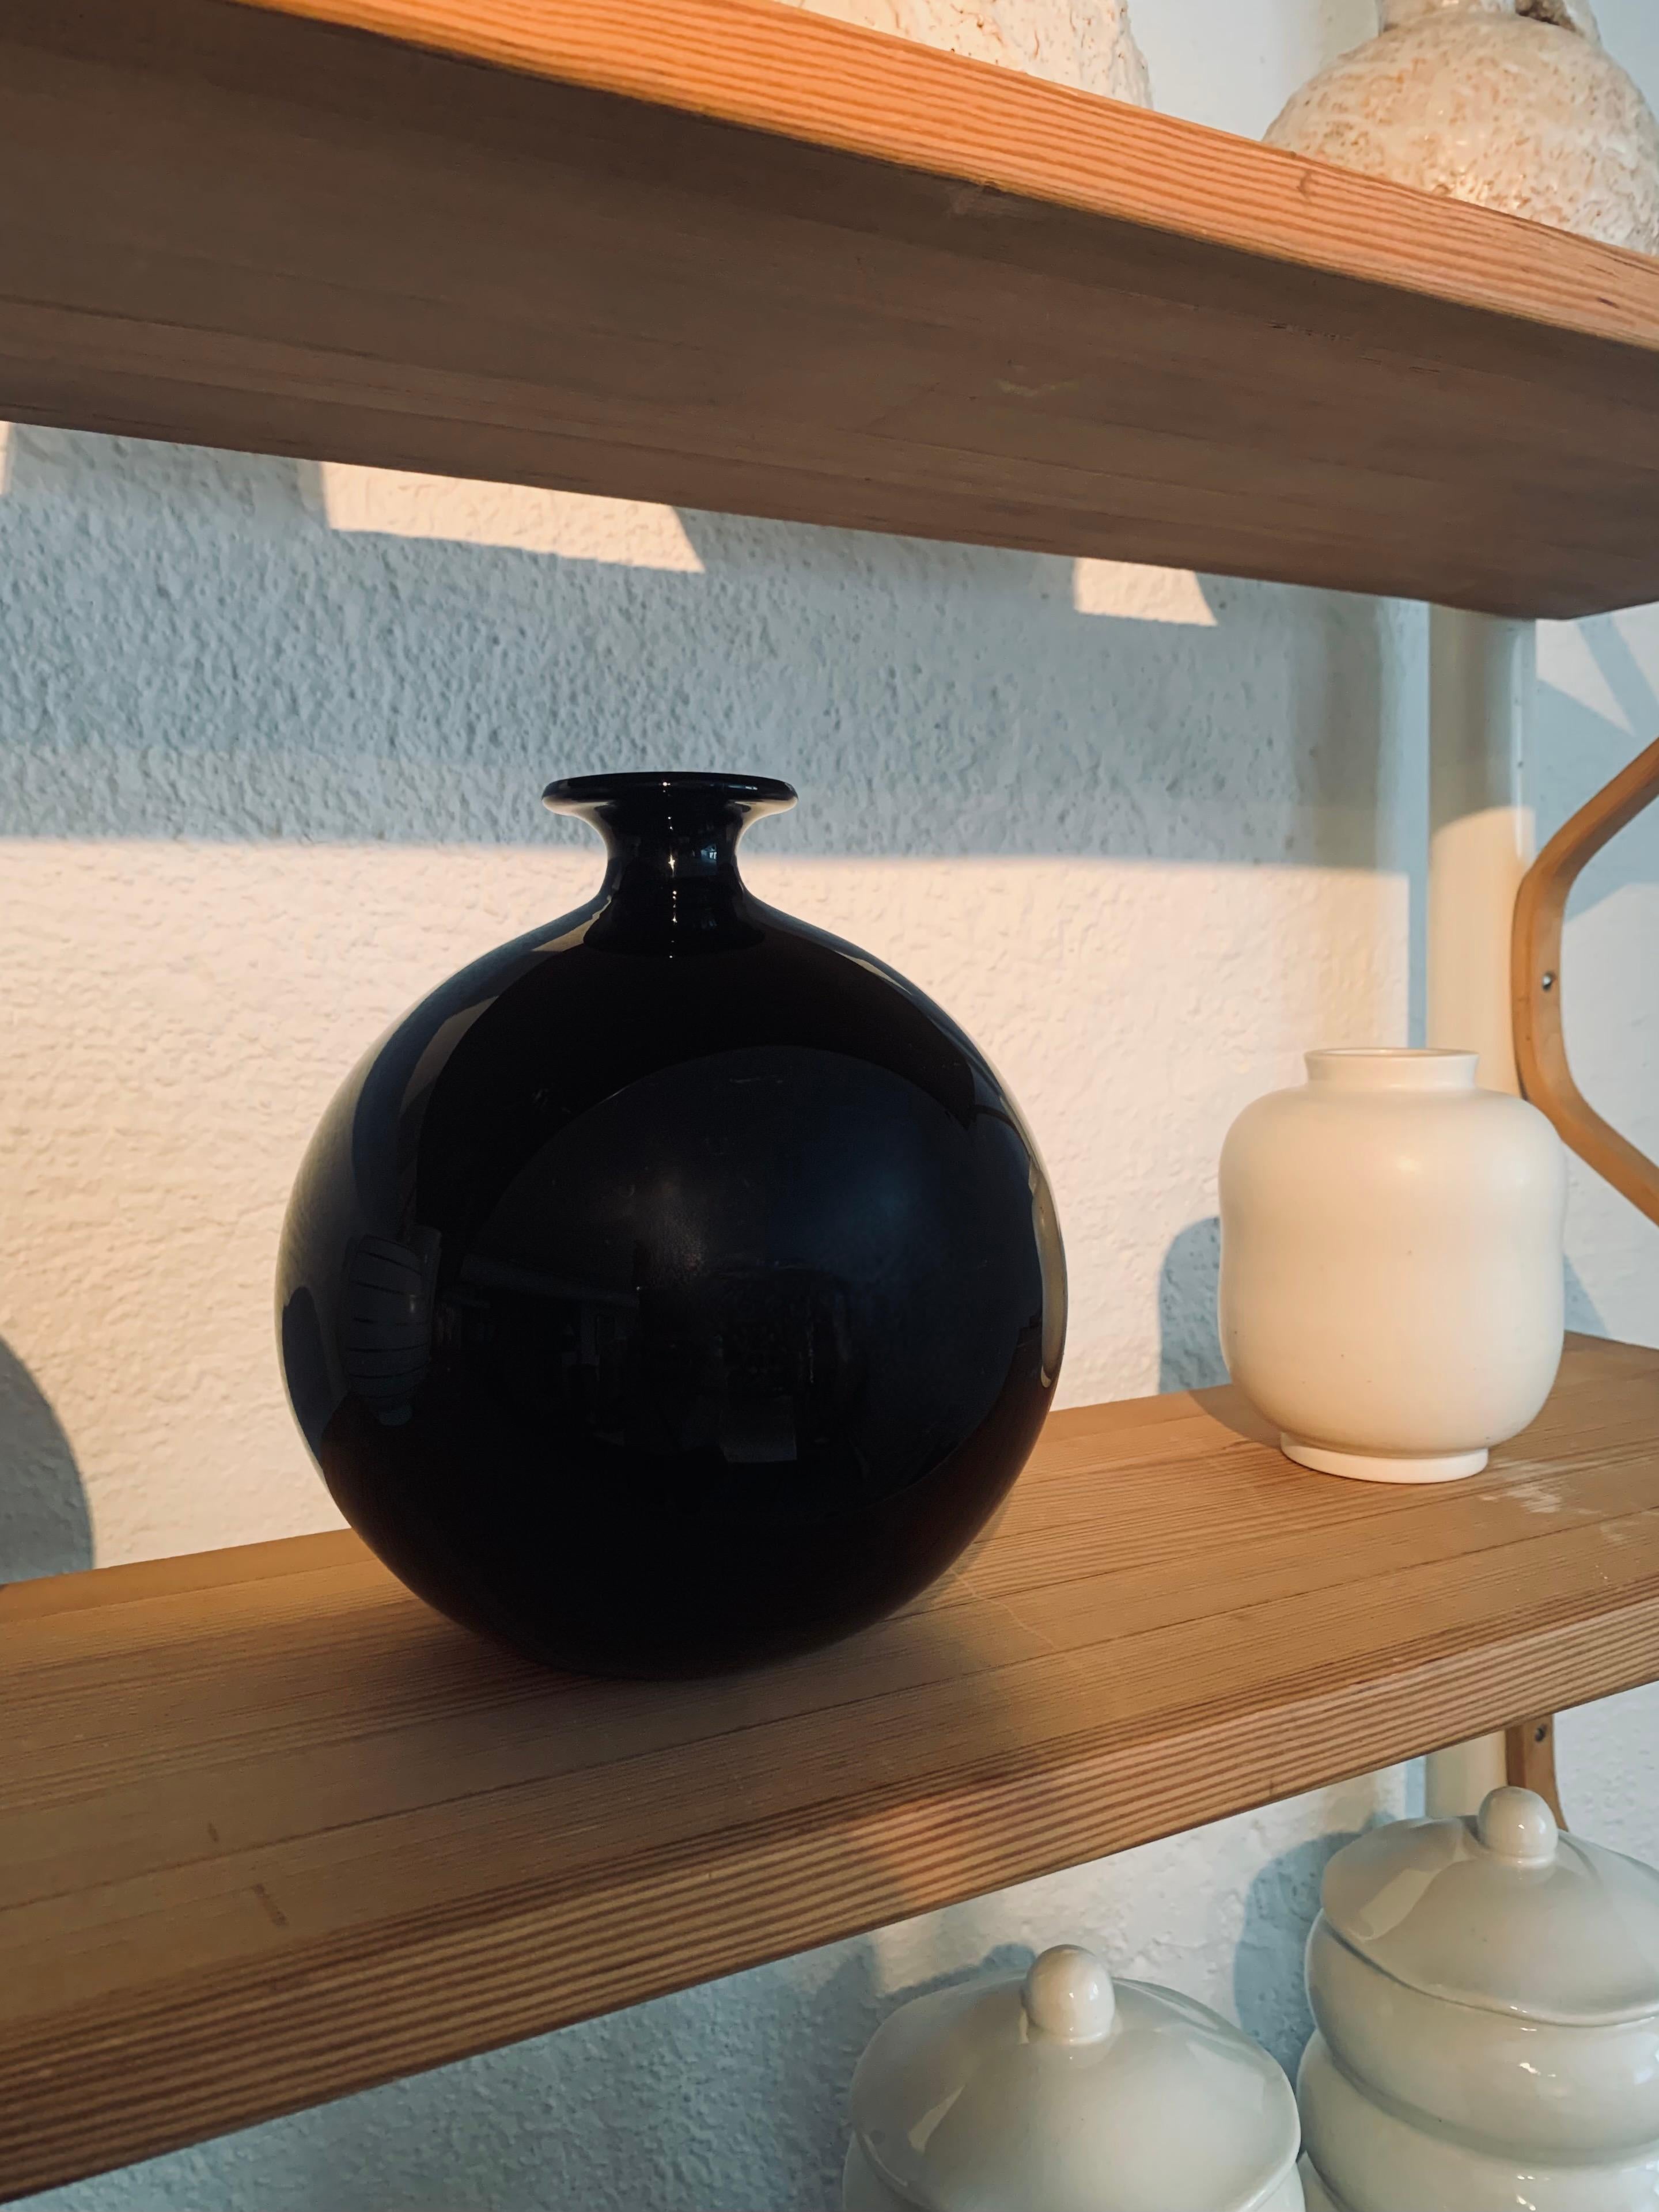 Black cryopas Flowerball vase designed in 1934 by Harald Elof Notini for Böhlmarks and produced by Pukeberg's Glass Factory. A sublime functionalist vase in black opaque glass. Unmarked.

The use of Cryopas glass, a version of opaline glass which